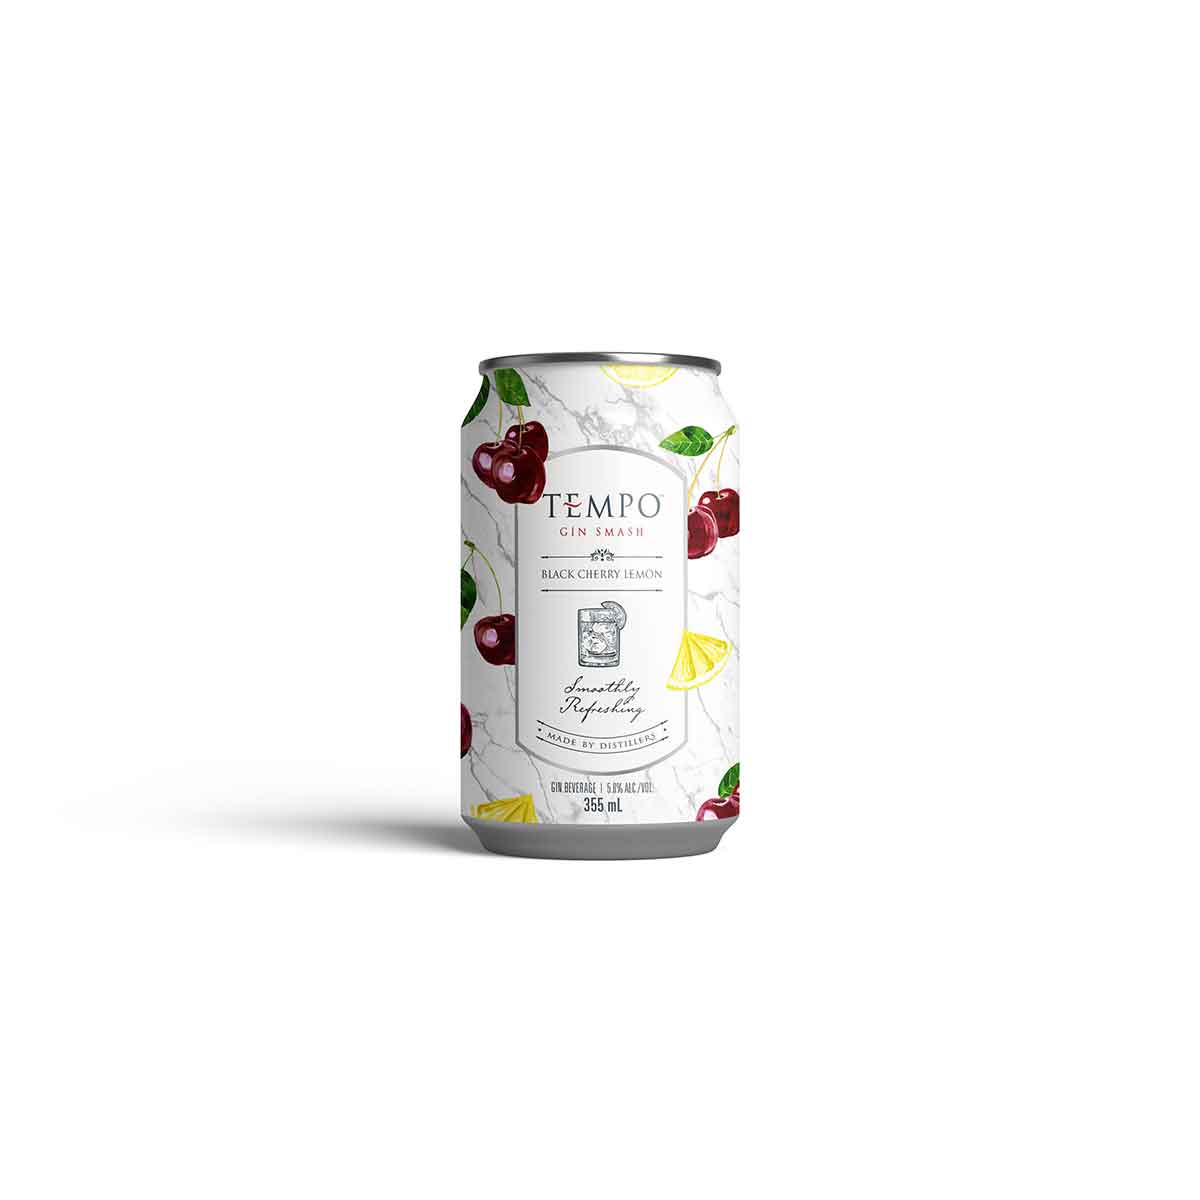 TAG Liquor Stores BC-TEMPO GIN GIN BLACK CHERRY 6 CANS